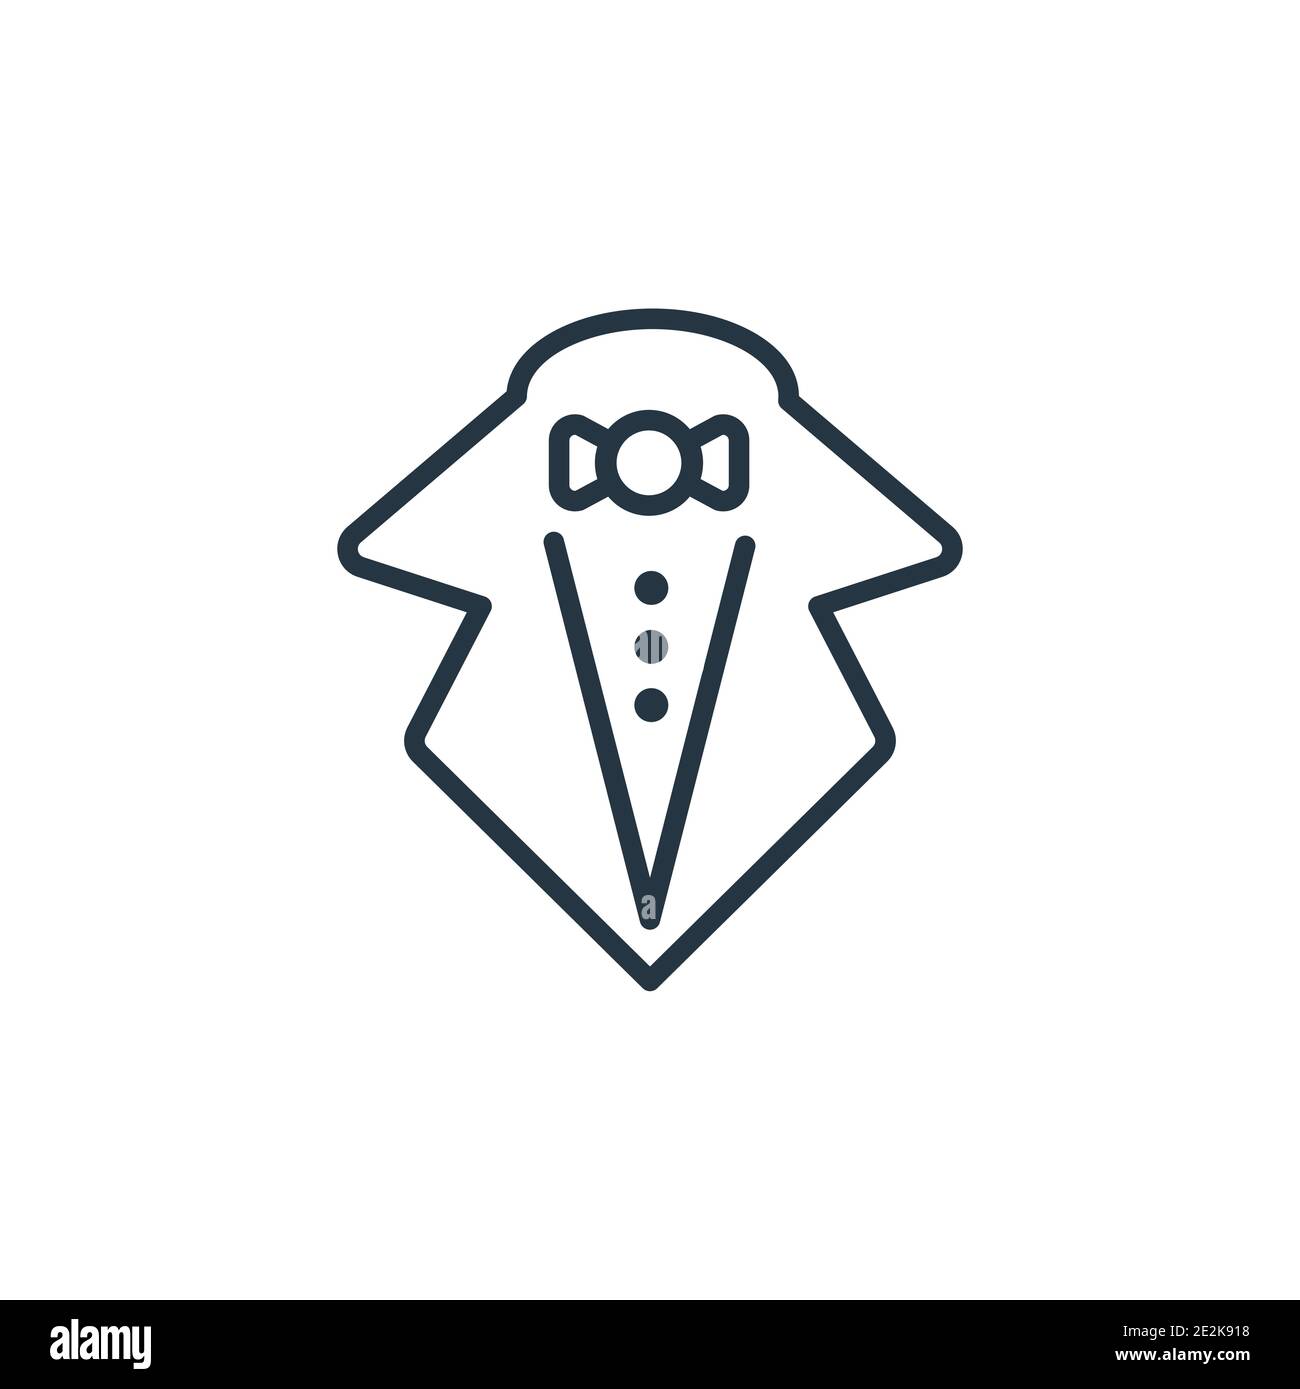 Tux outline vector icon. Thin line black tux icon, flat vector simple ...